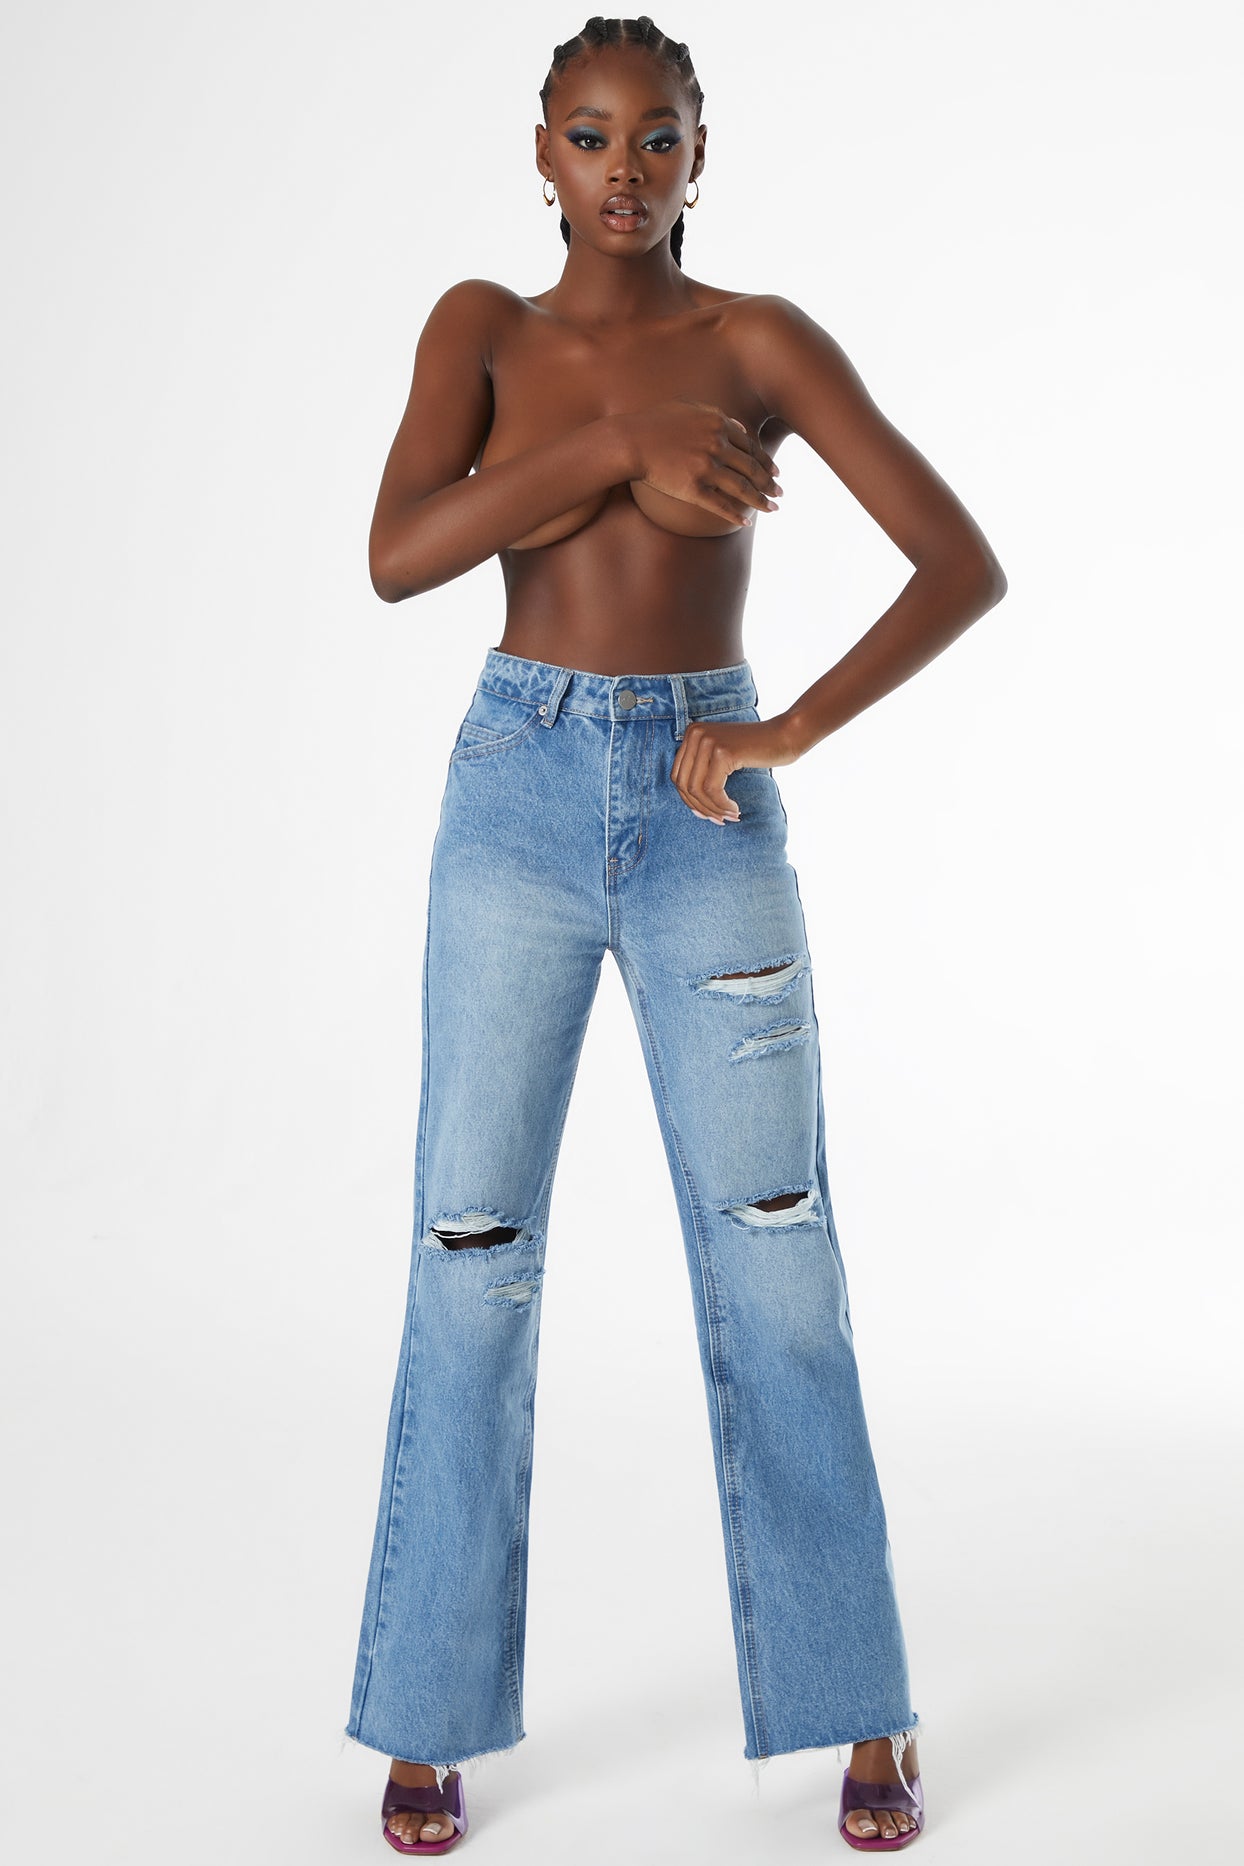 Too Much Booty Low Rise Jeans - Medium Blue Wash